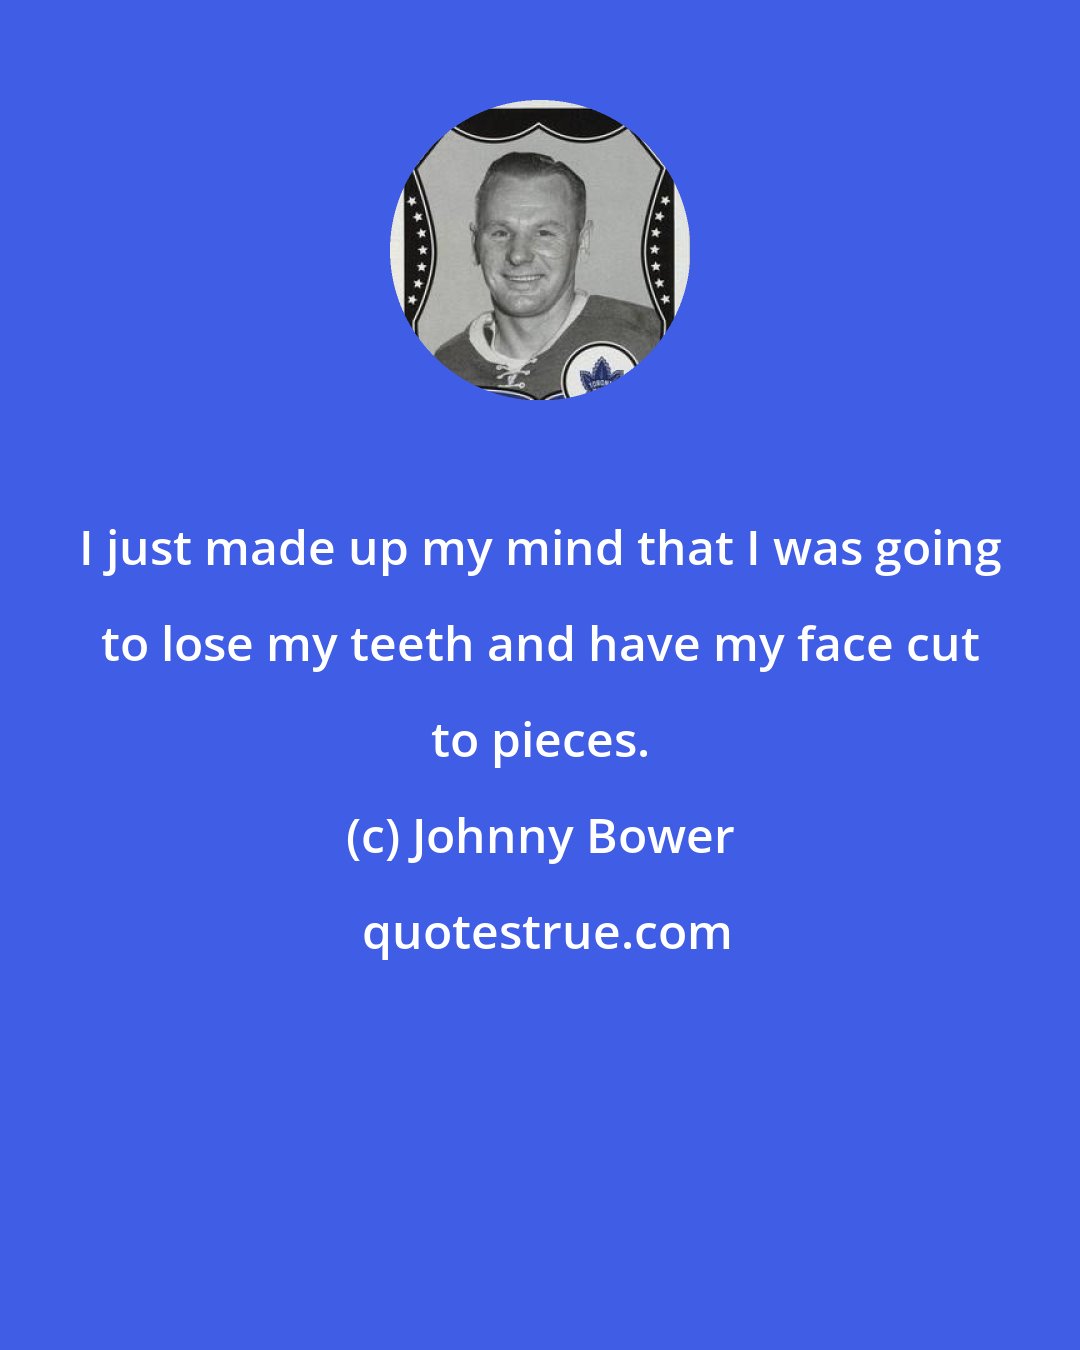 Johnny Bower: I just made up my mind that I was going to lose my teeth and have my face cut to pieces.